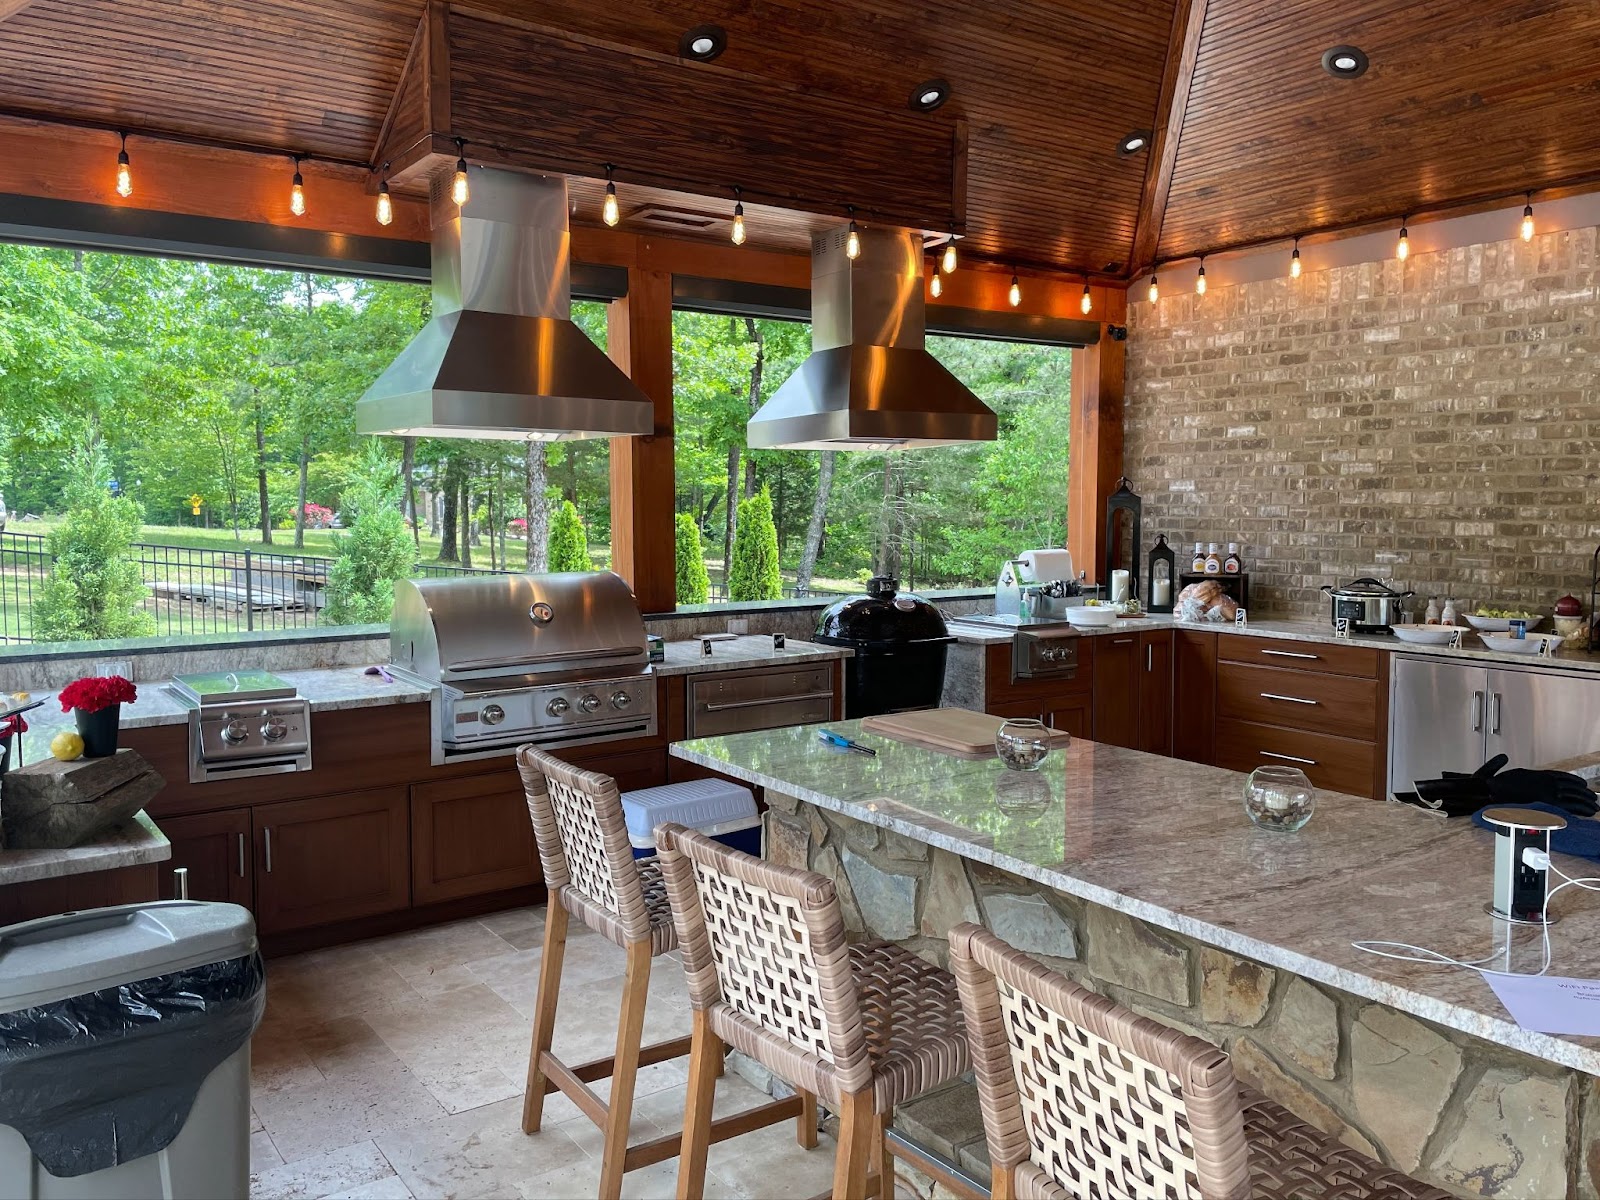 Welcoming open-air cooking space with a natural stone countertop, twin ventilation hoods, and a view of a lush backyard.